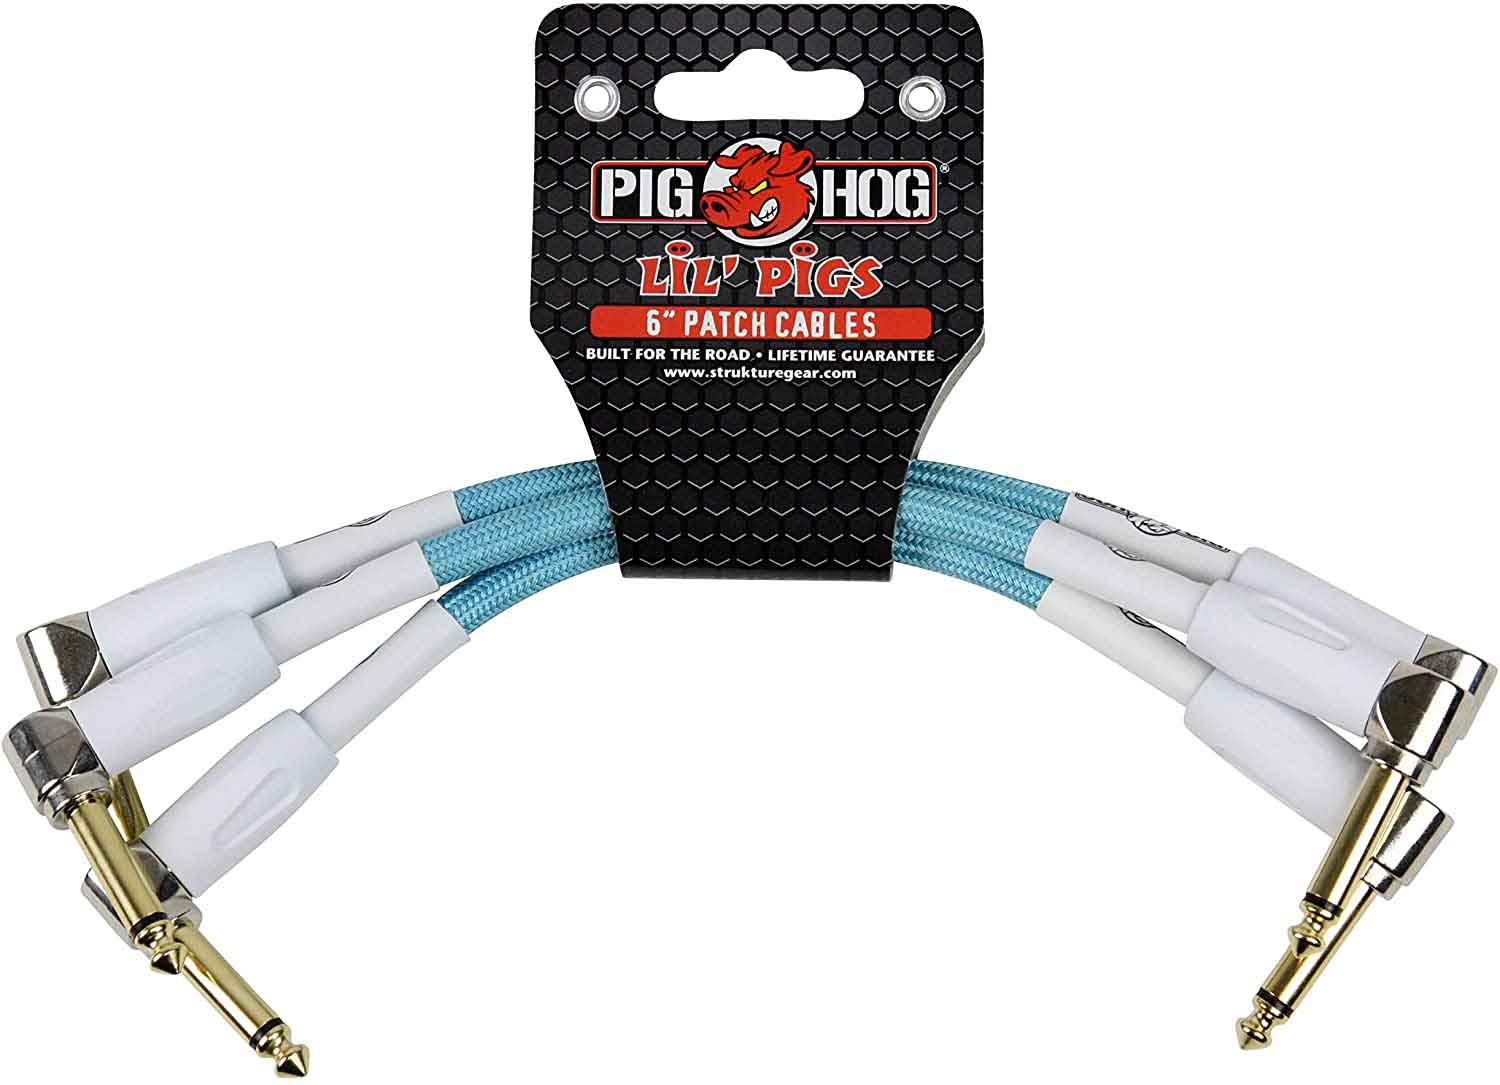 Pig Hog PHLIL6DB 1/4 to 1/4 Right-Angled 6 Inch Patch Cables (Vintage Daphne ) 3 Pack - Hollywood DJ